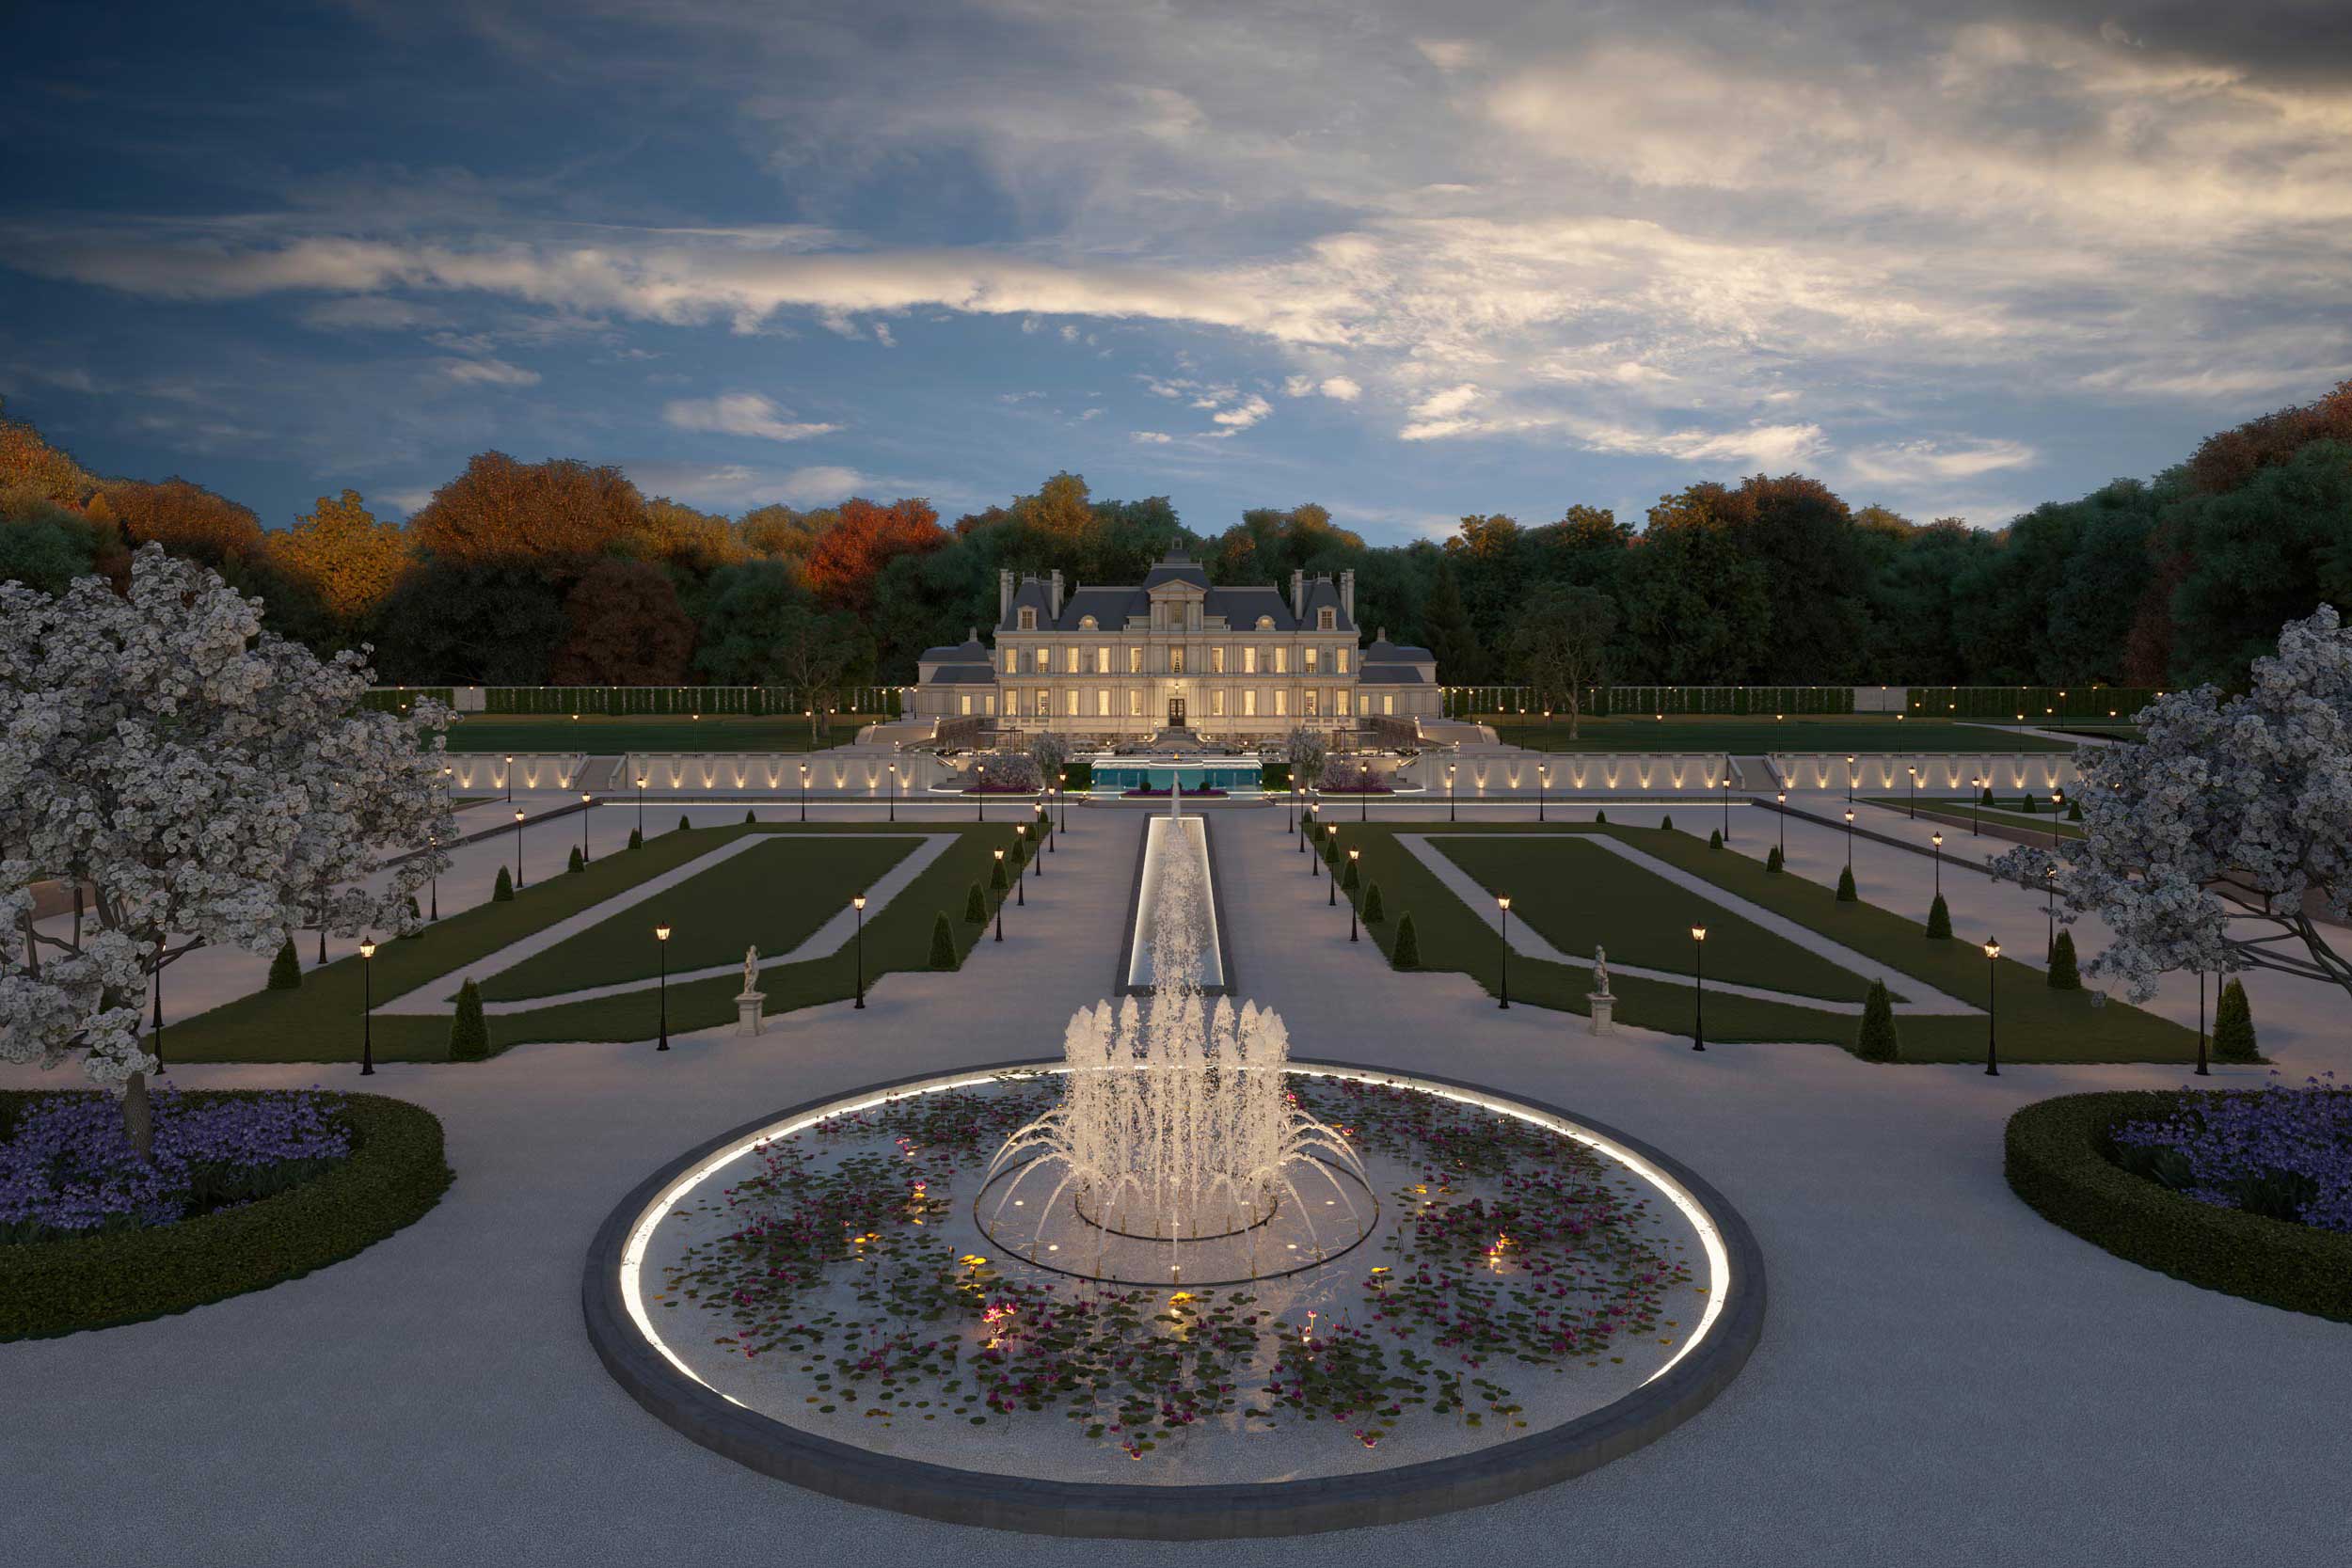 Luxury Residential Mansion Fountains & Driveway CGI Design Visual by Unit4 Studio London UK